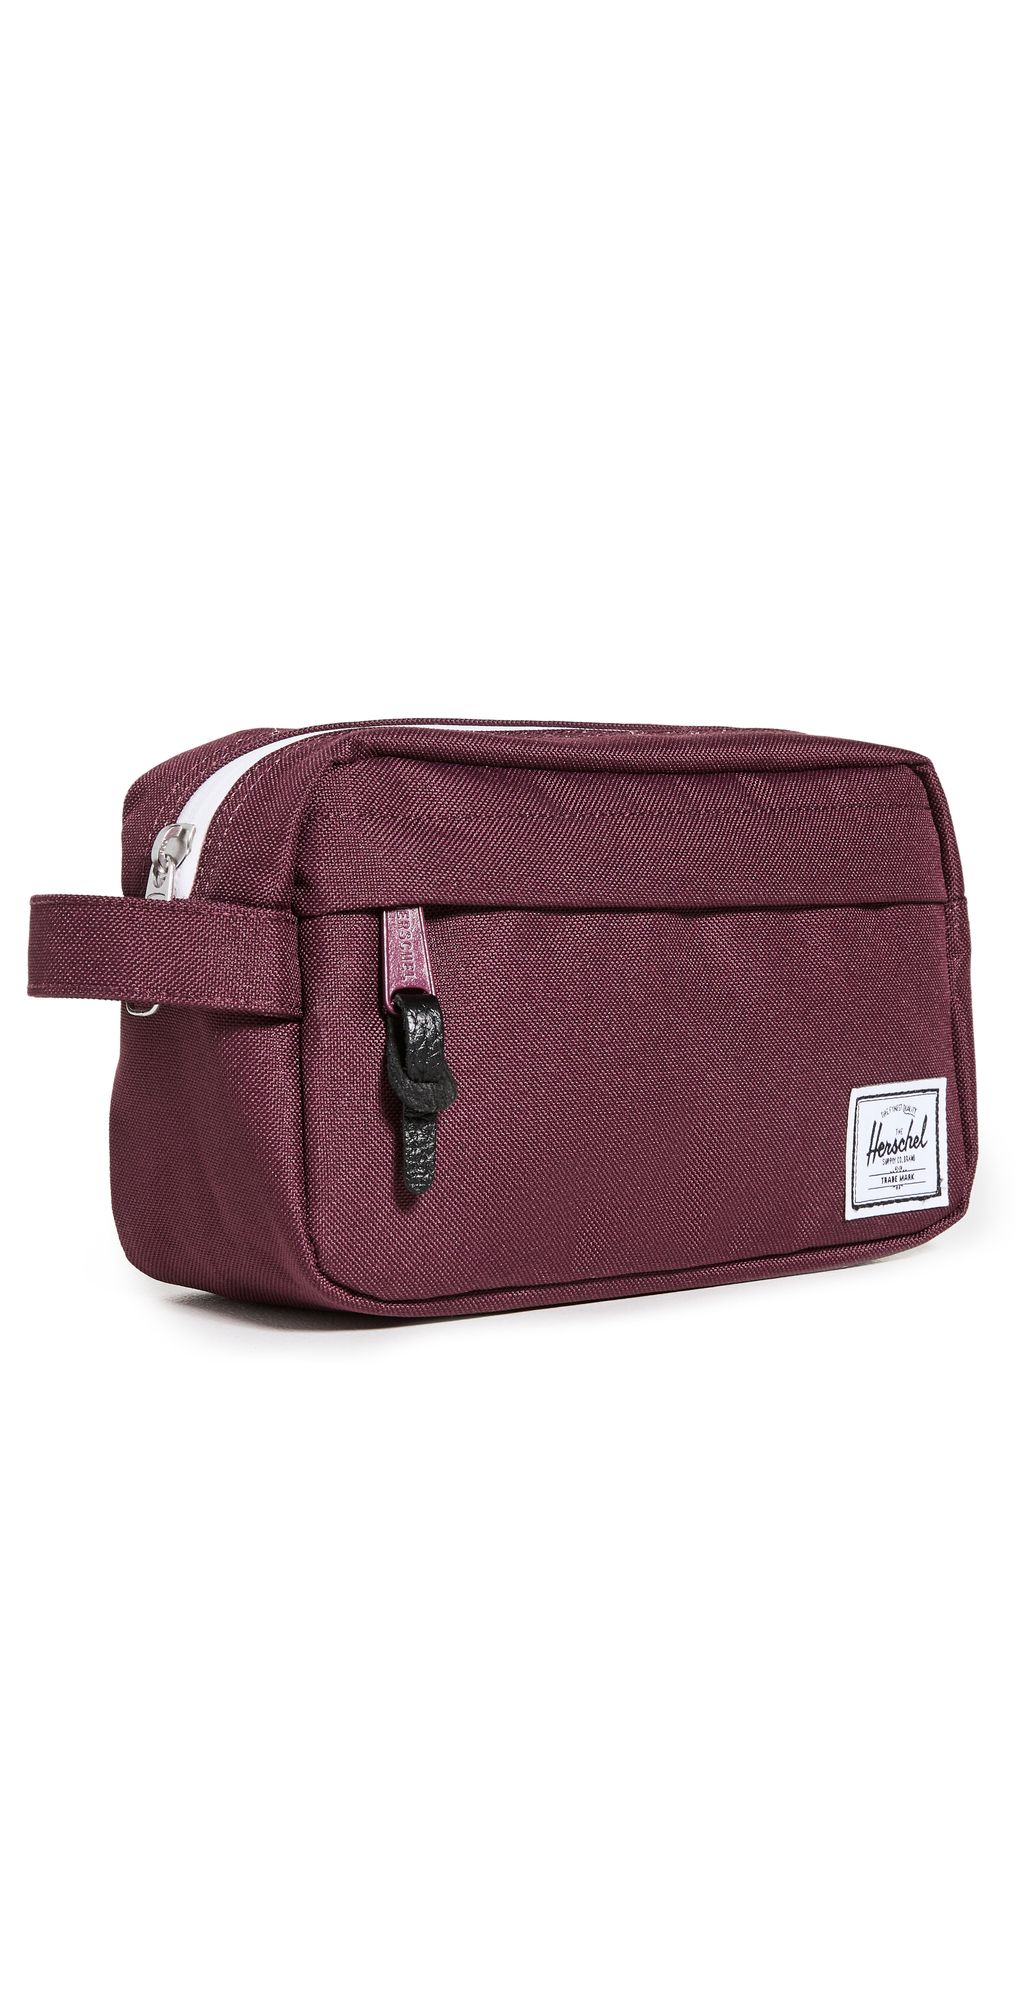 Chapter Carry On Travel Kit | Shopbop